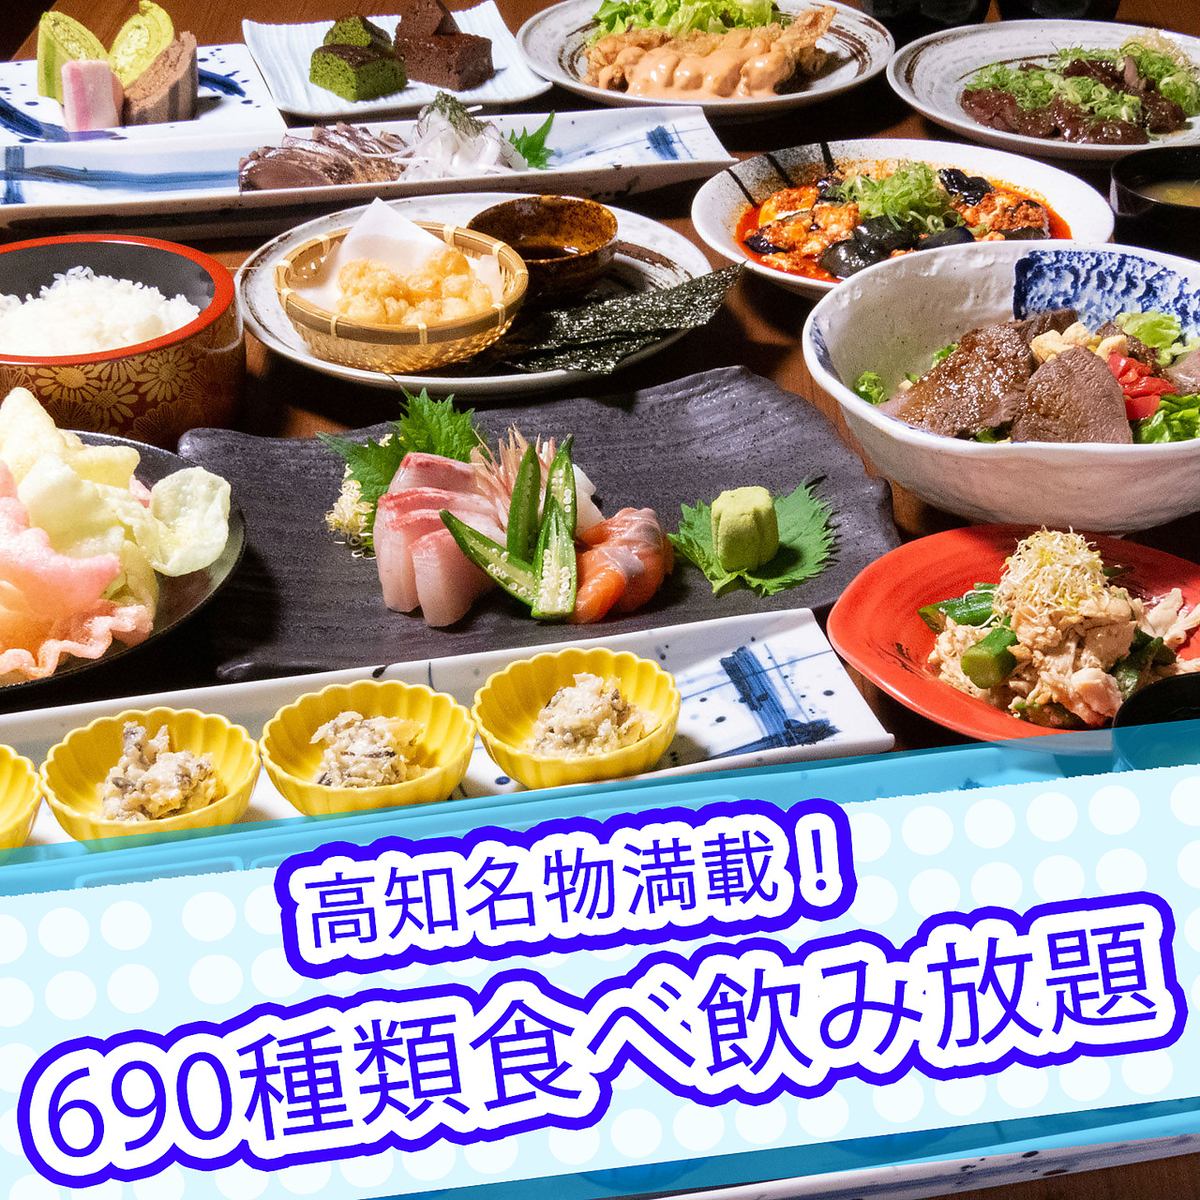 Approximately 690 kinds of 3-hour all-you-can-eat meals starting from 4,000 yen ♪ Great coupons available